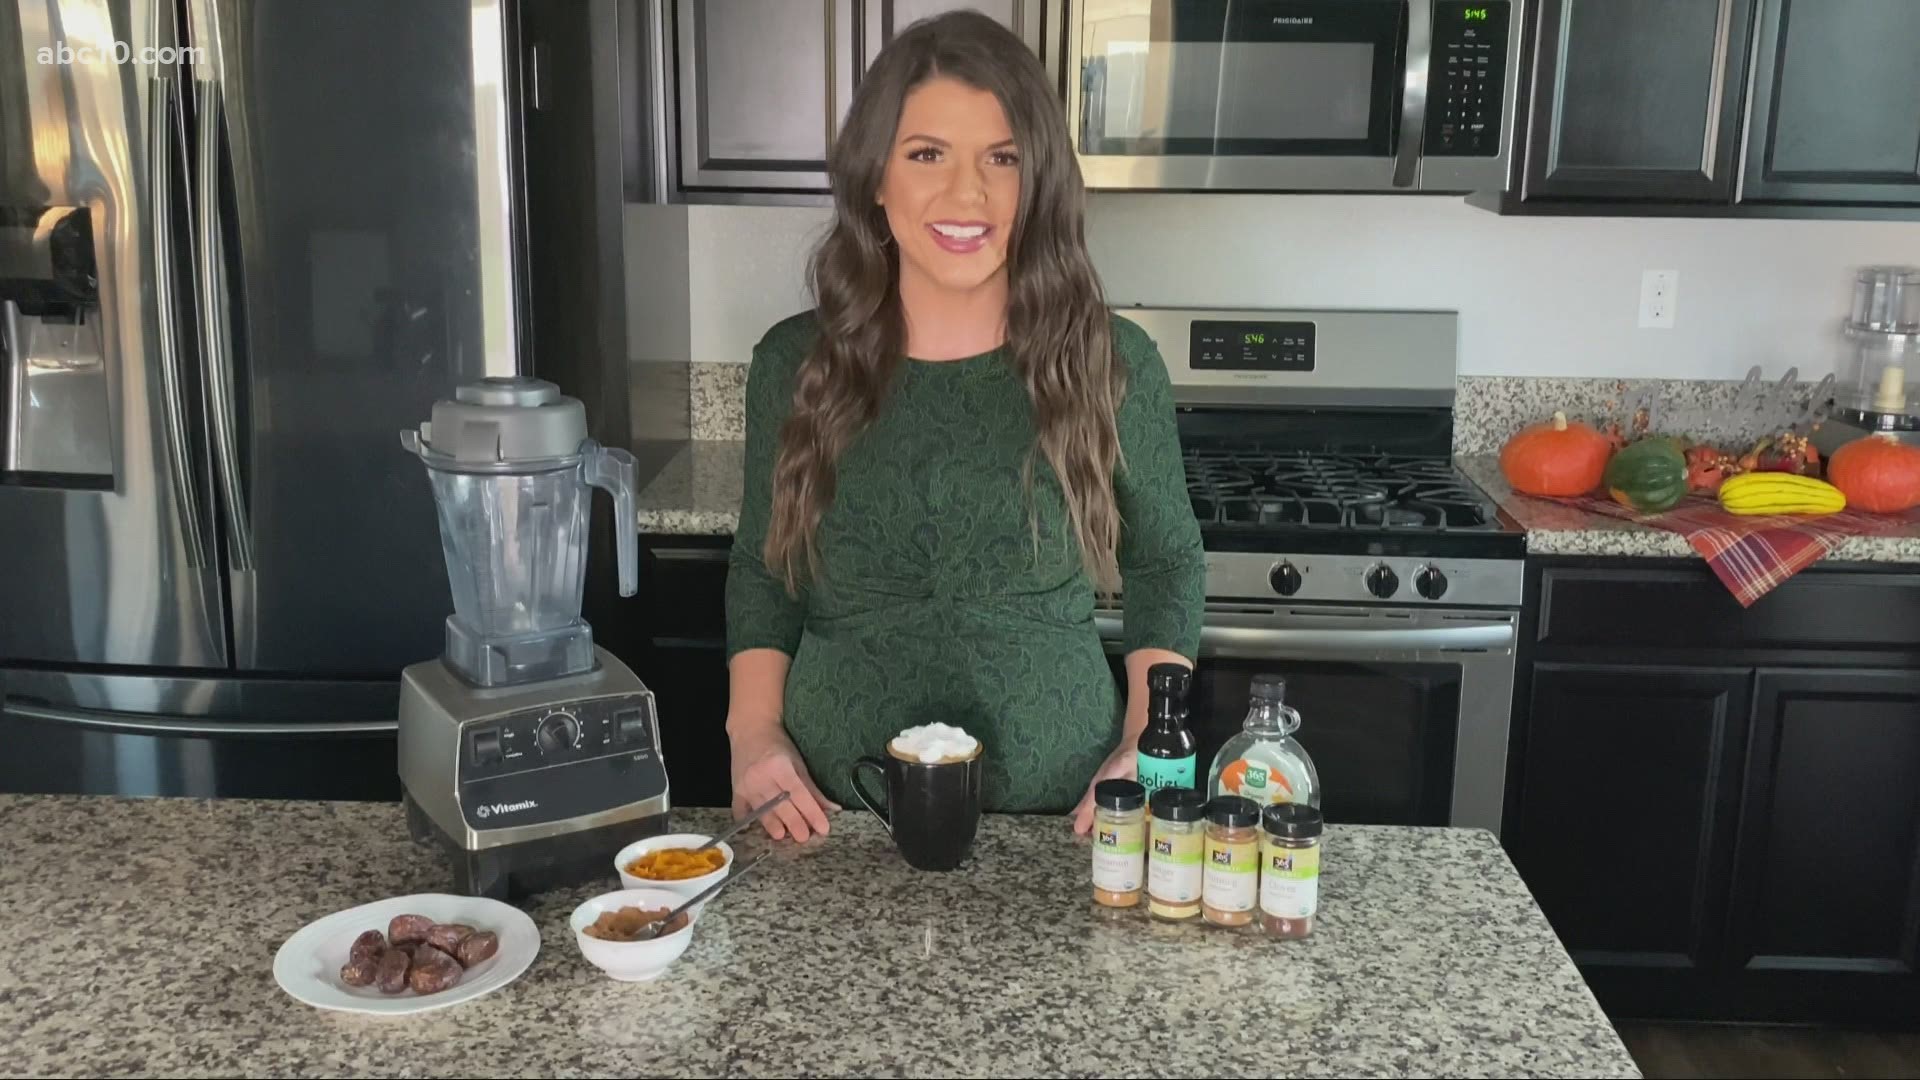 Megan Evans shares a recipe with real pumpkin, dates, spices and coffee to satisfy your "PSL" craving at home.